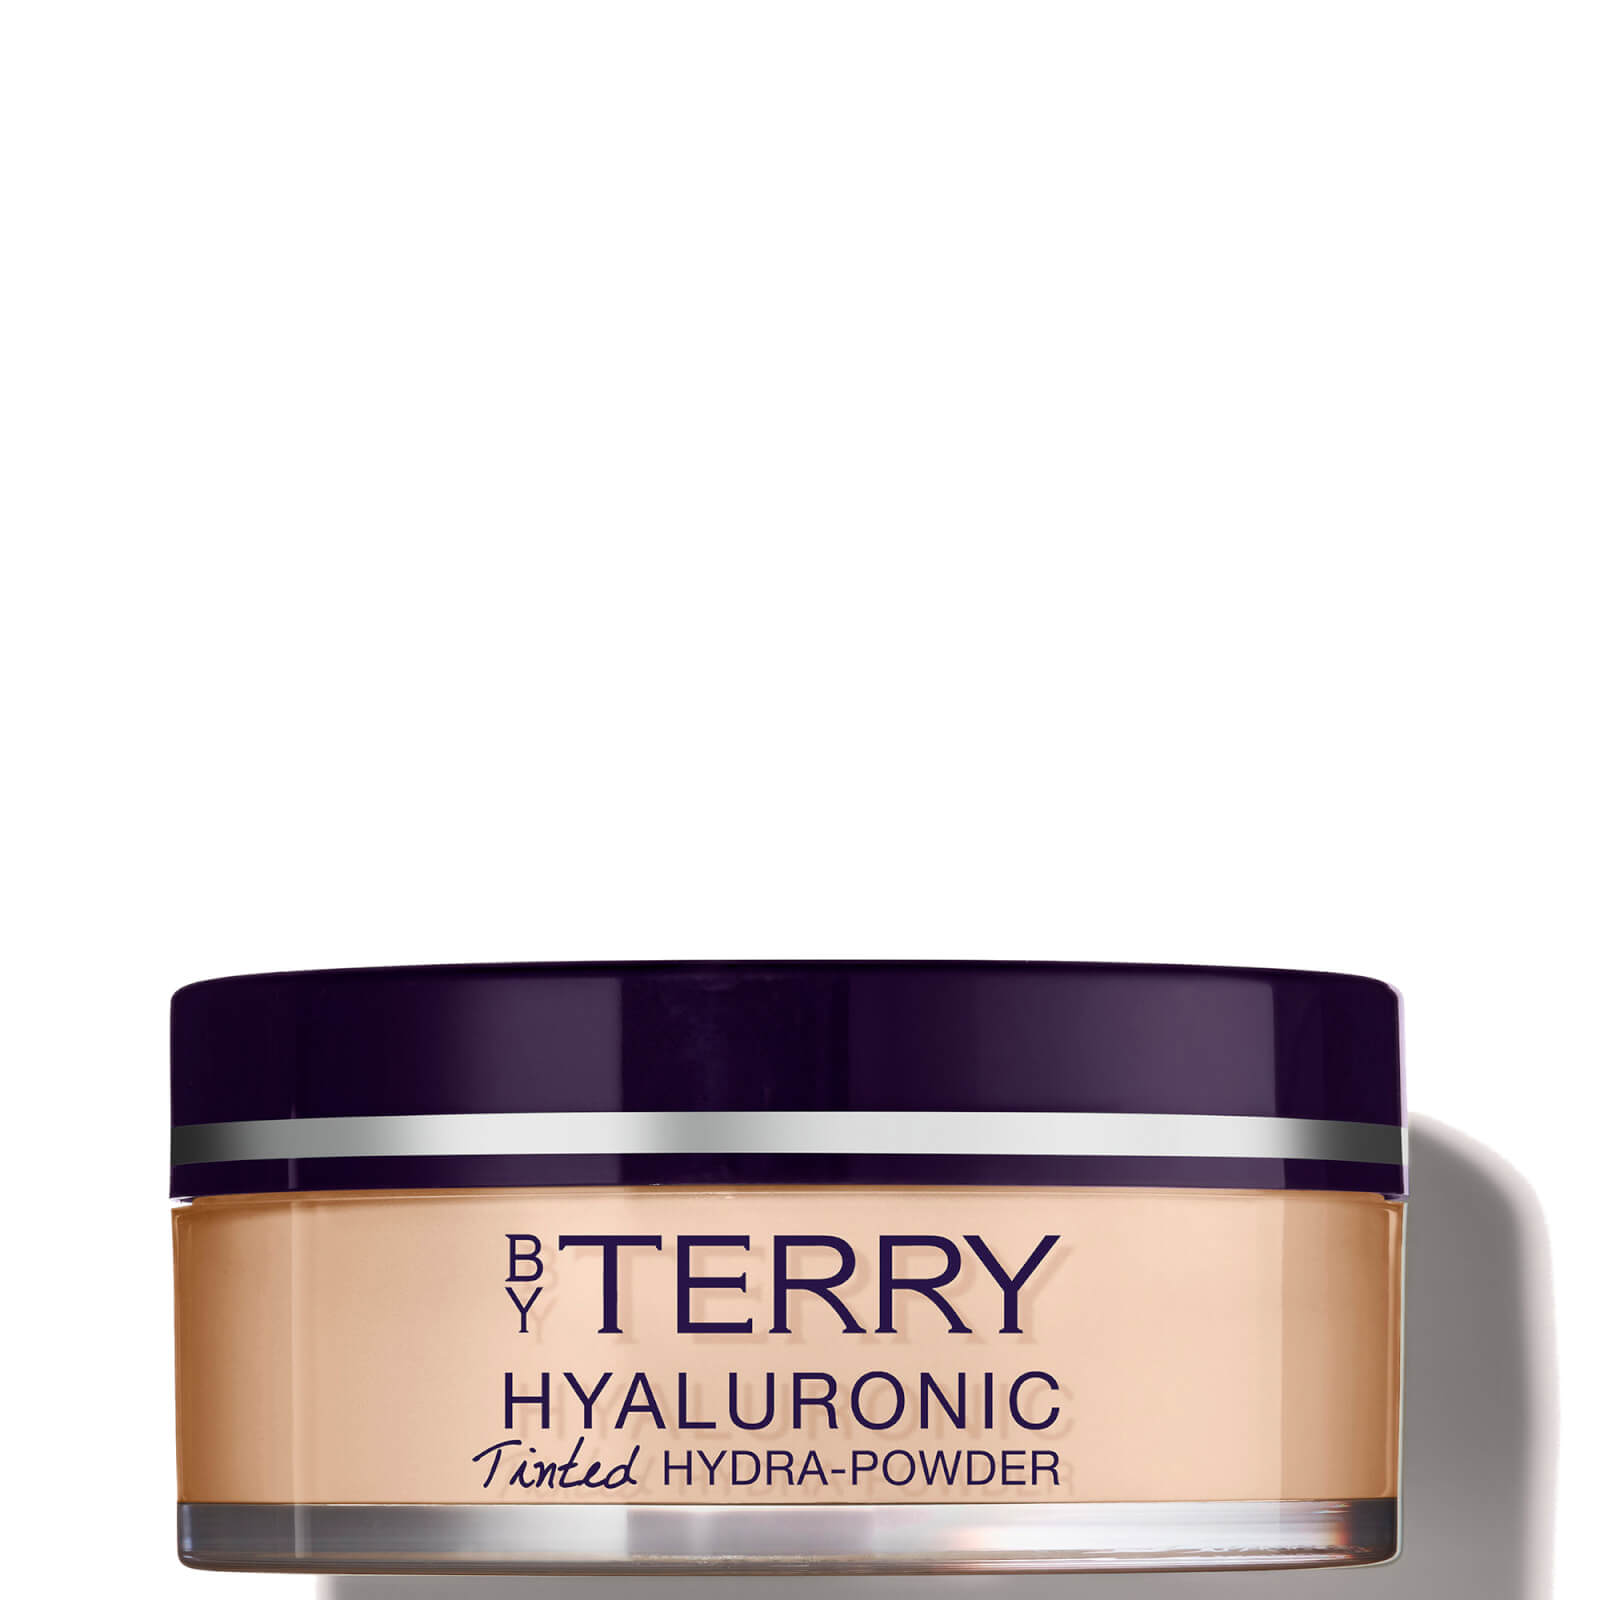 Image of By Terry Hyaluronic Tinted Hydra-Powder 10g (Various Shades) - N200. Natural